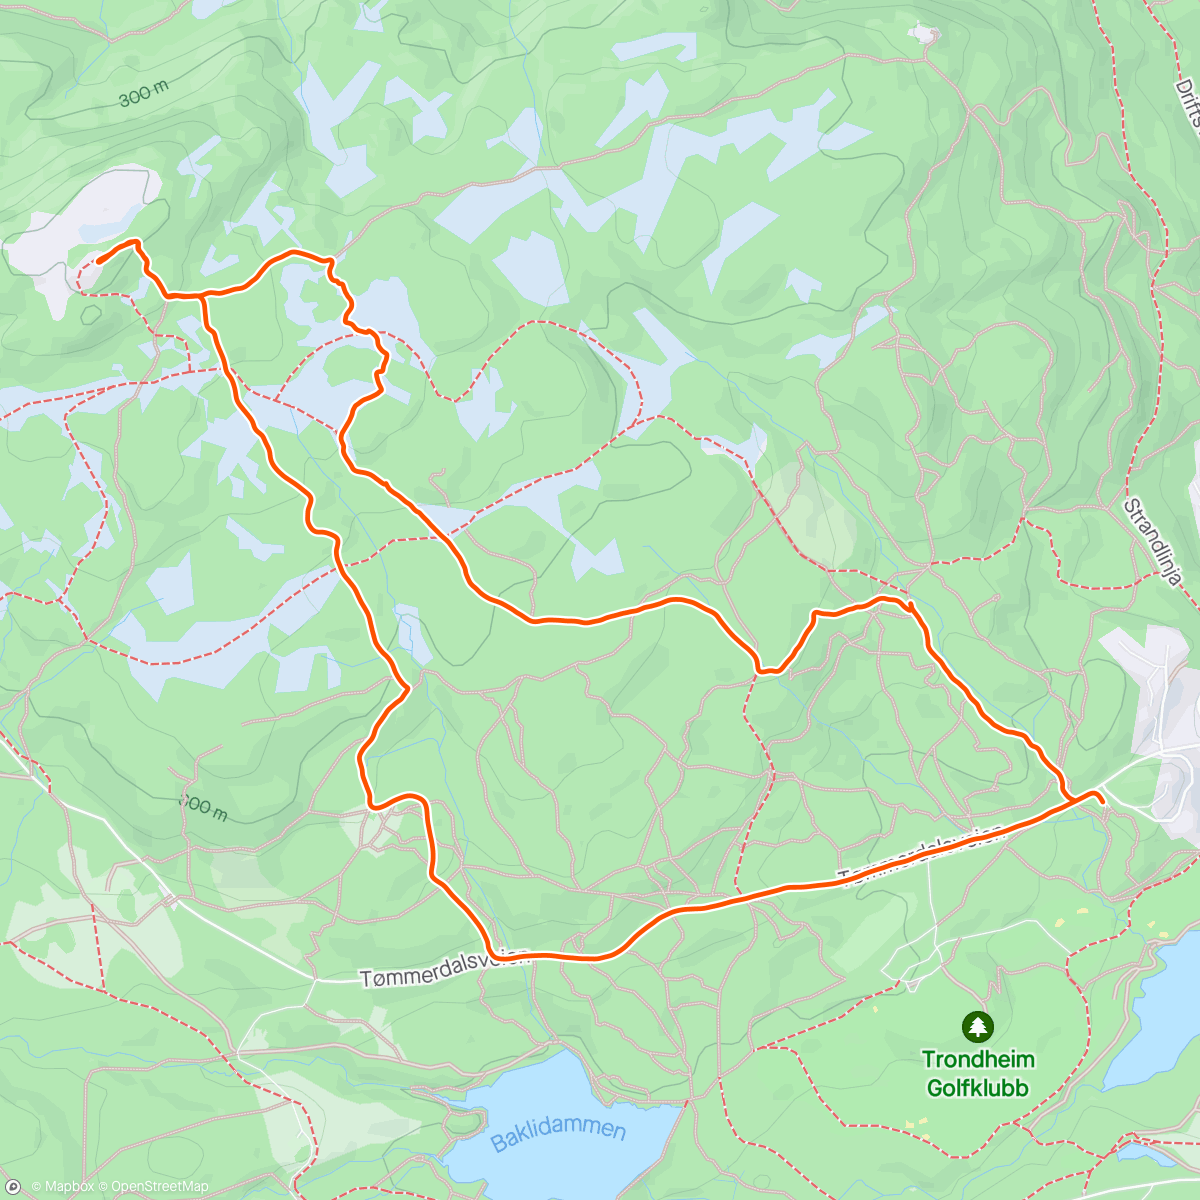 Map of the activity, Geitfjellet